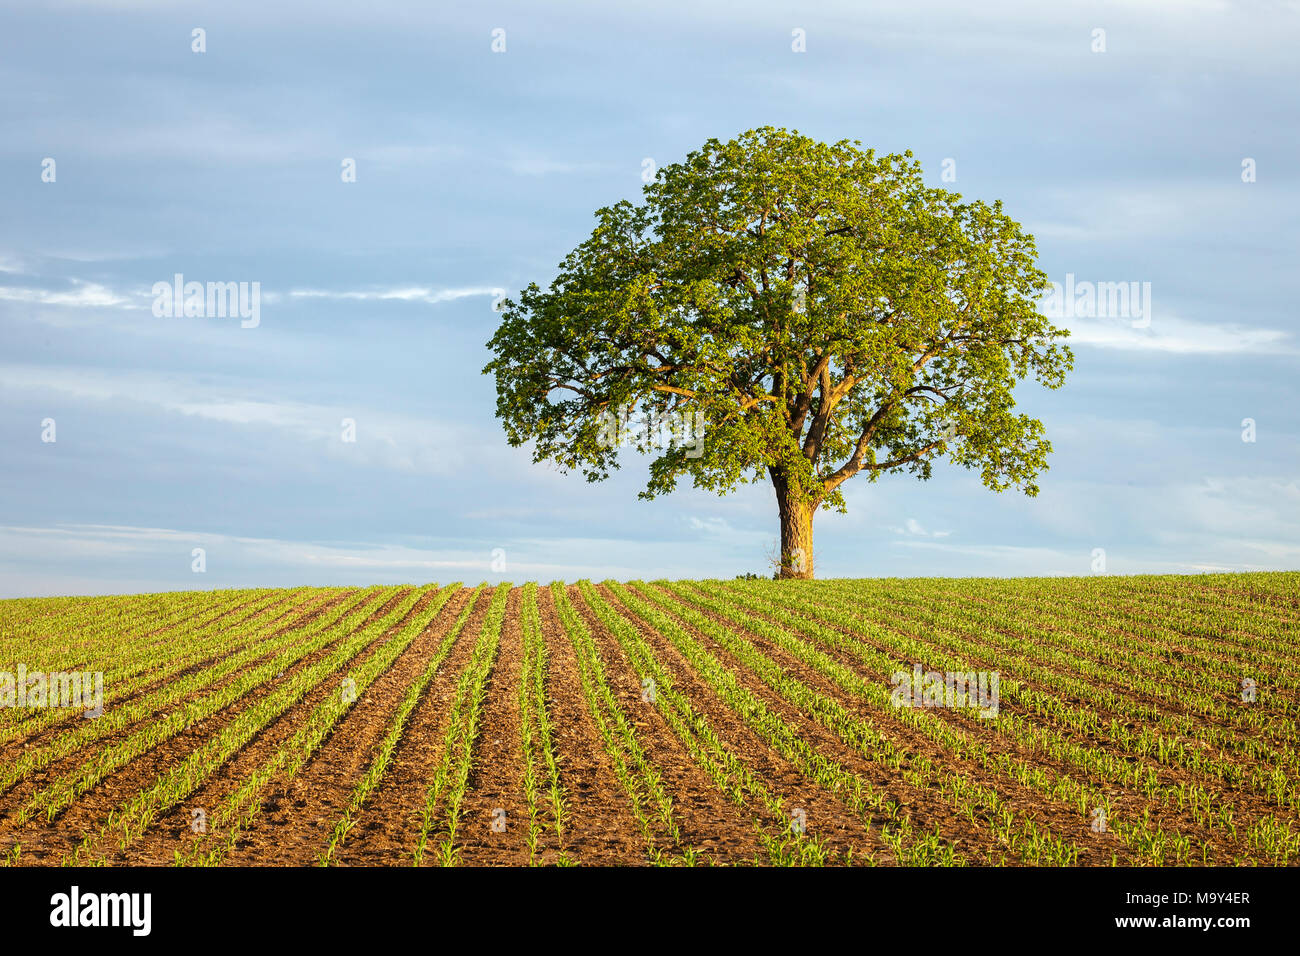 A farm field with a new crop of corn growing and a walnut tree. Stock Photo